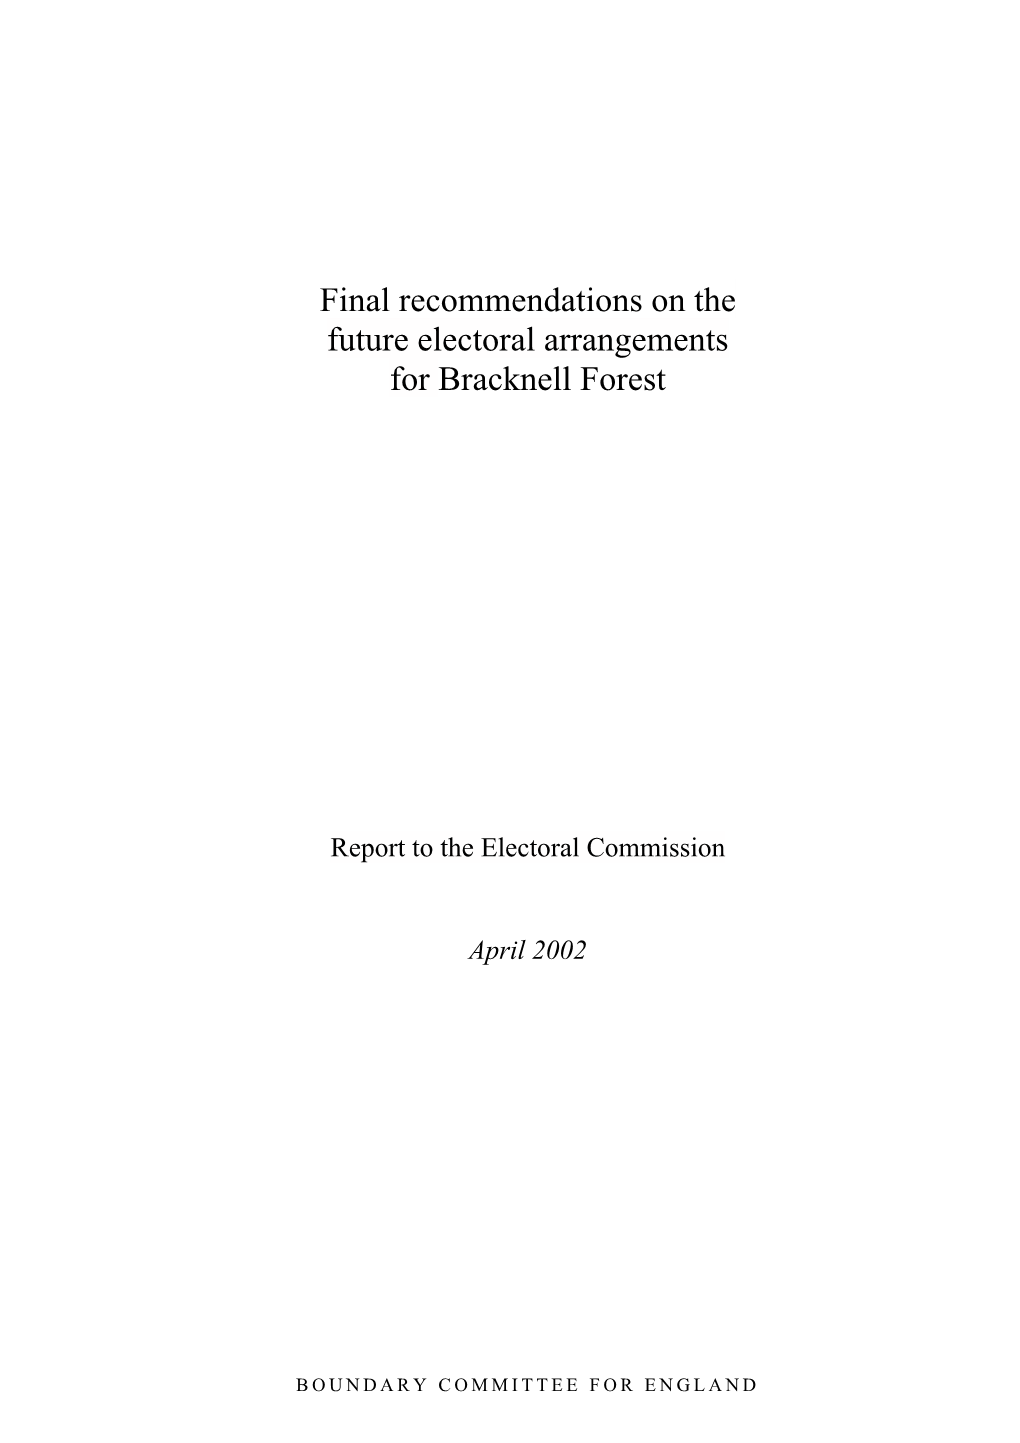 Final Recommendations on the Future Electoral Arrangements for Bracknell Forest